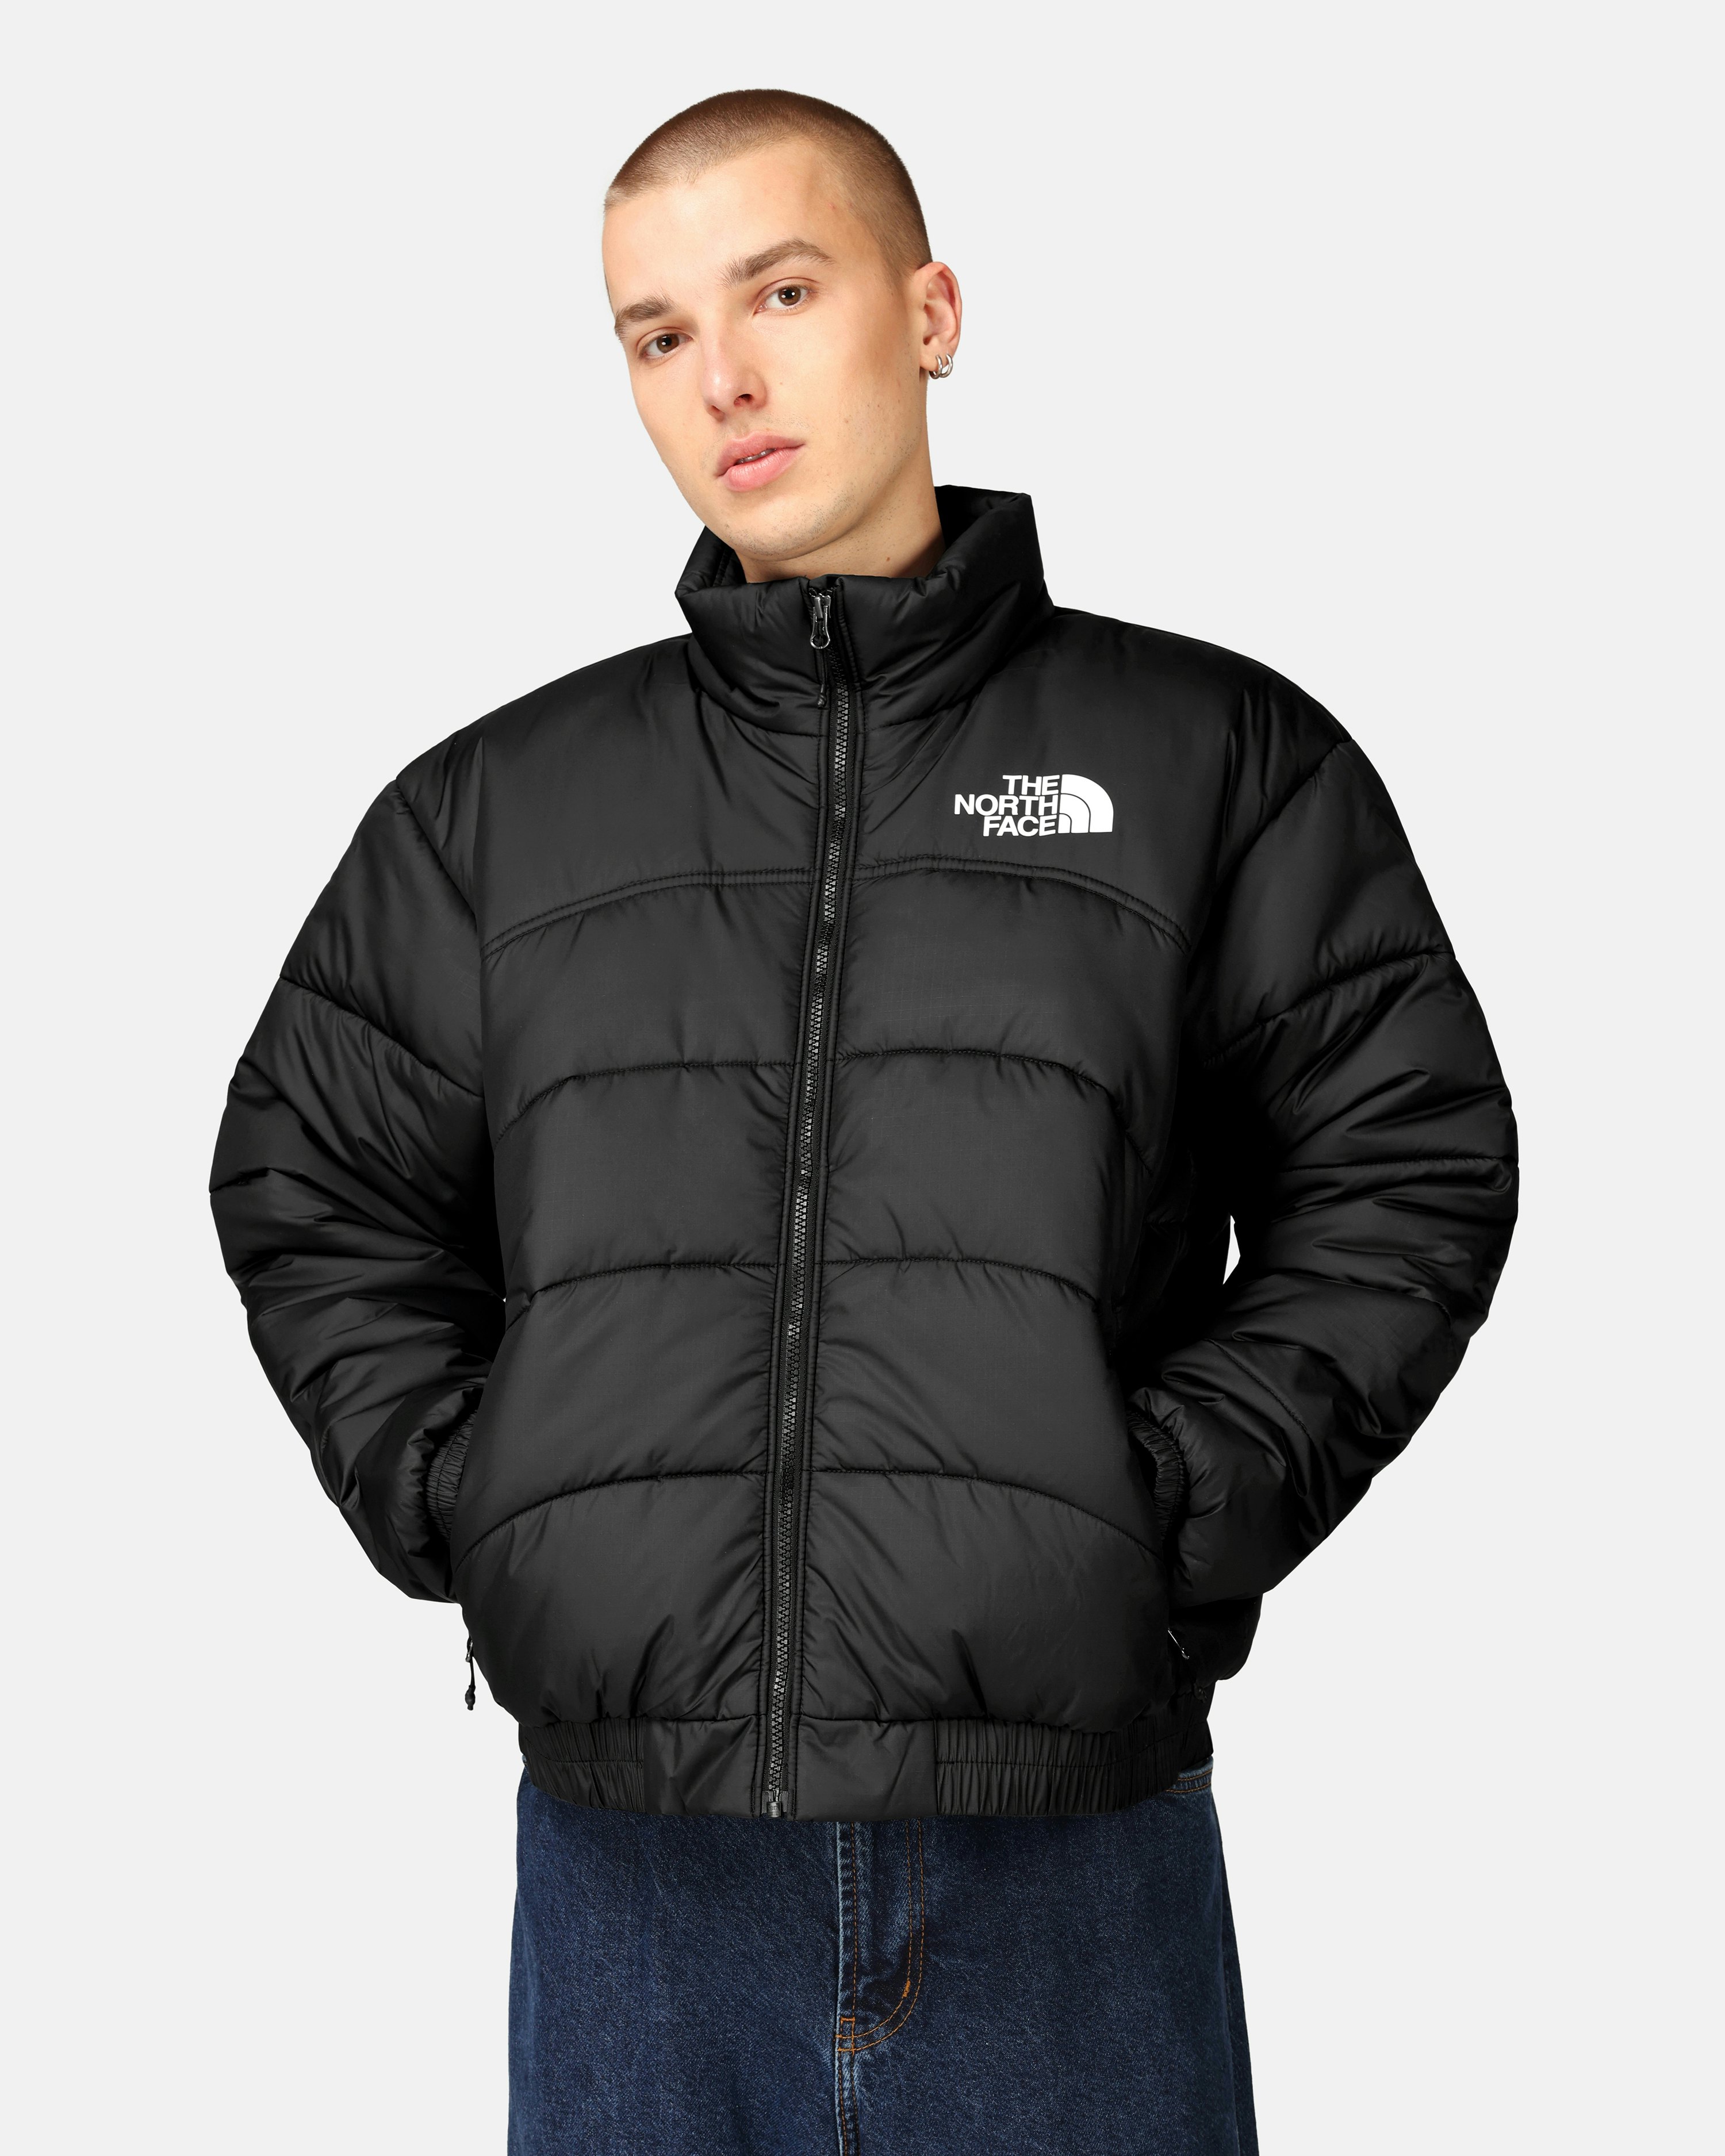 The North Face 2000 Synthetic Puffer Jacket Black | Men | Junkyard